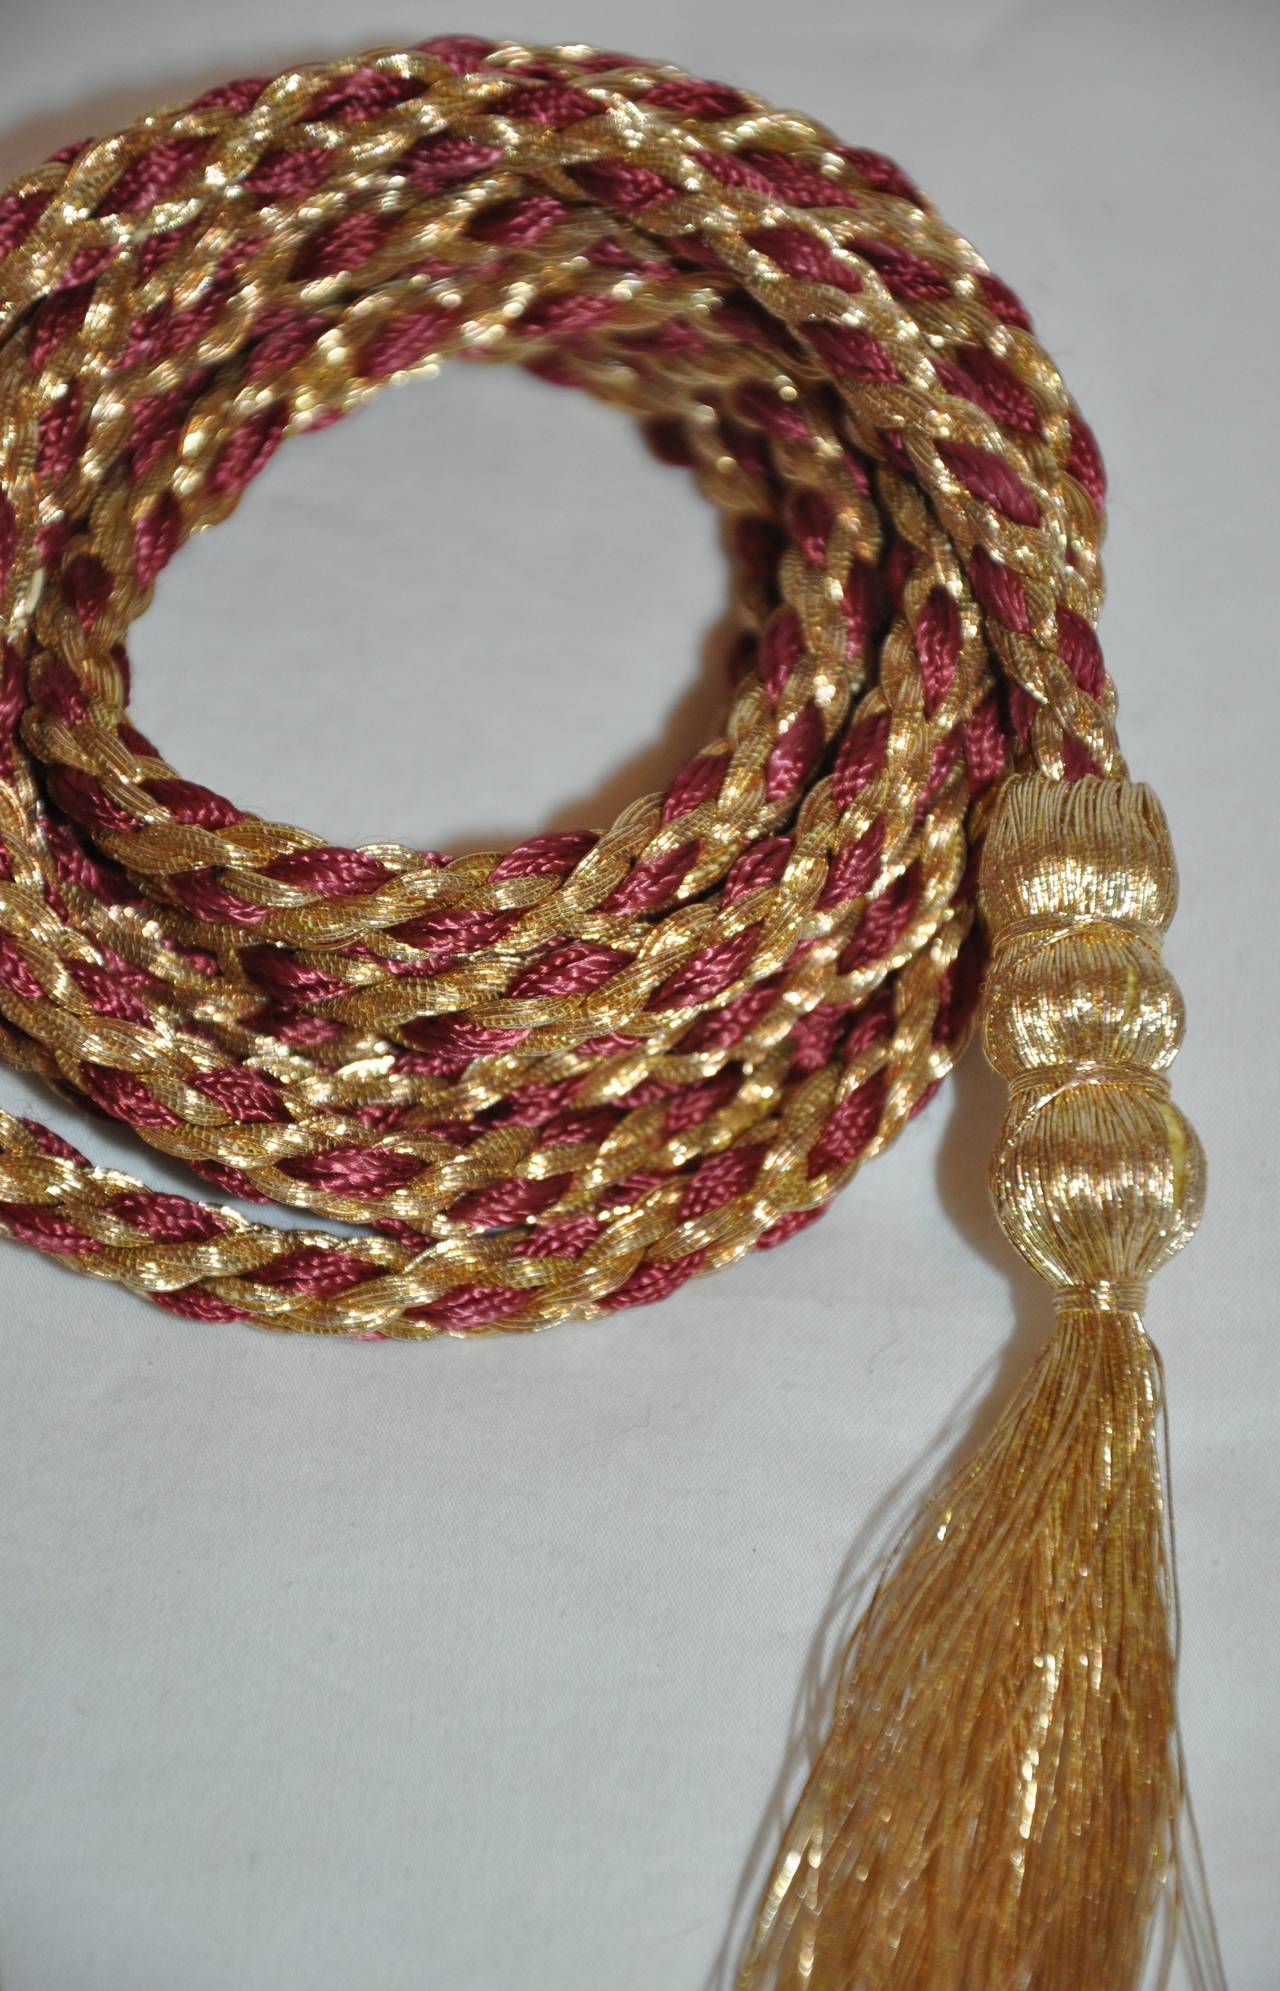 Yves Saint Laurent iconic Russian Collection coco-brown silk cord woven with metallic gold lame is accented with 3